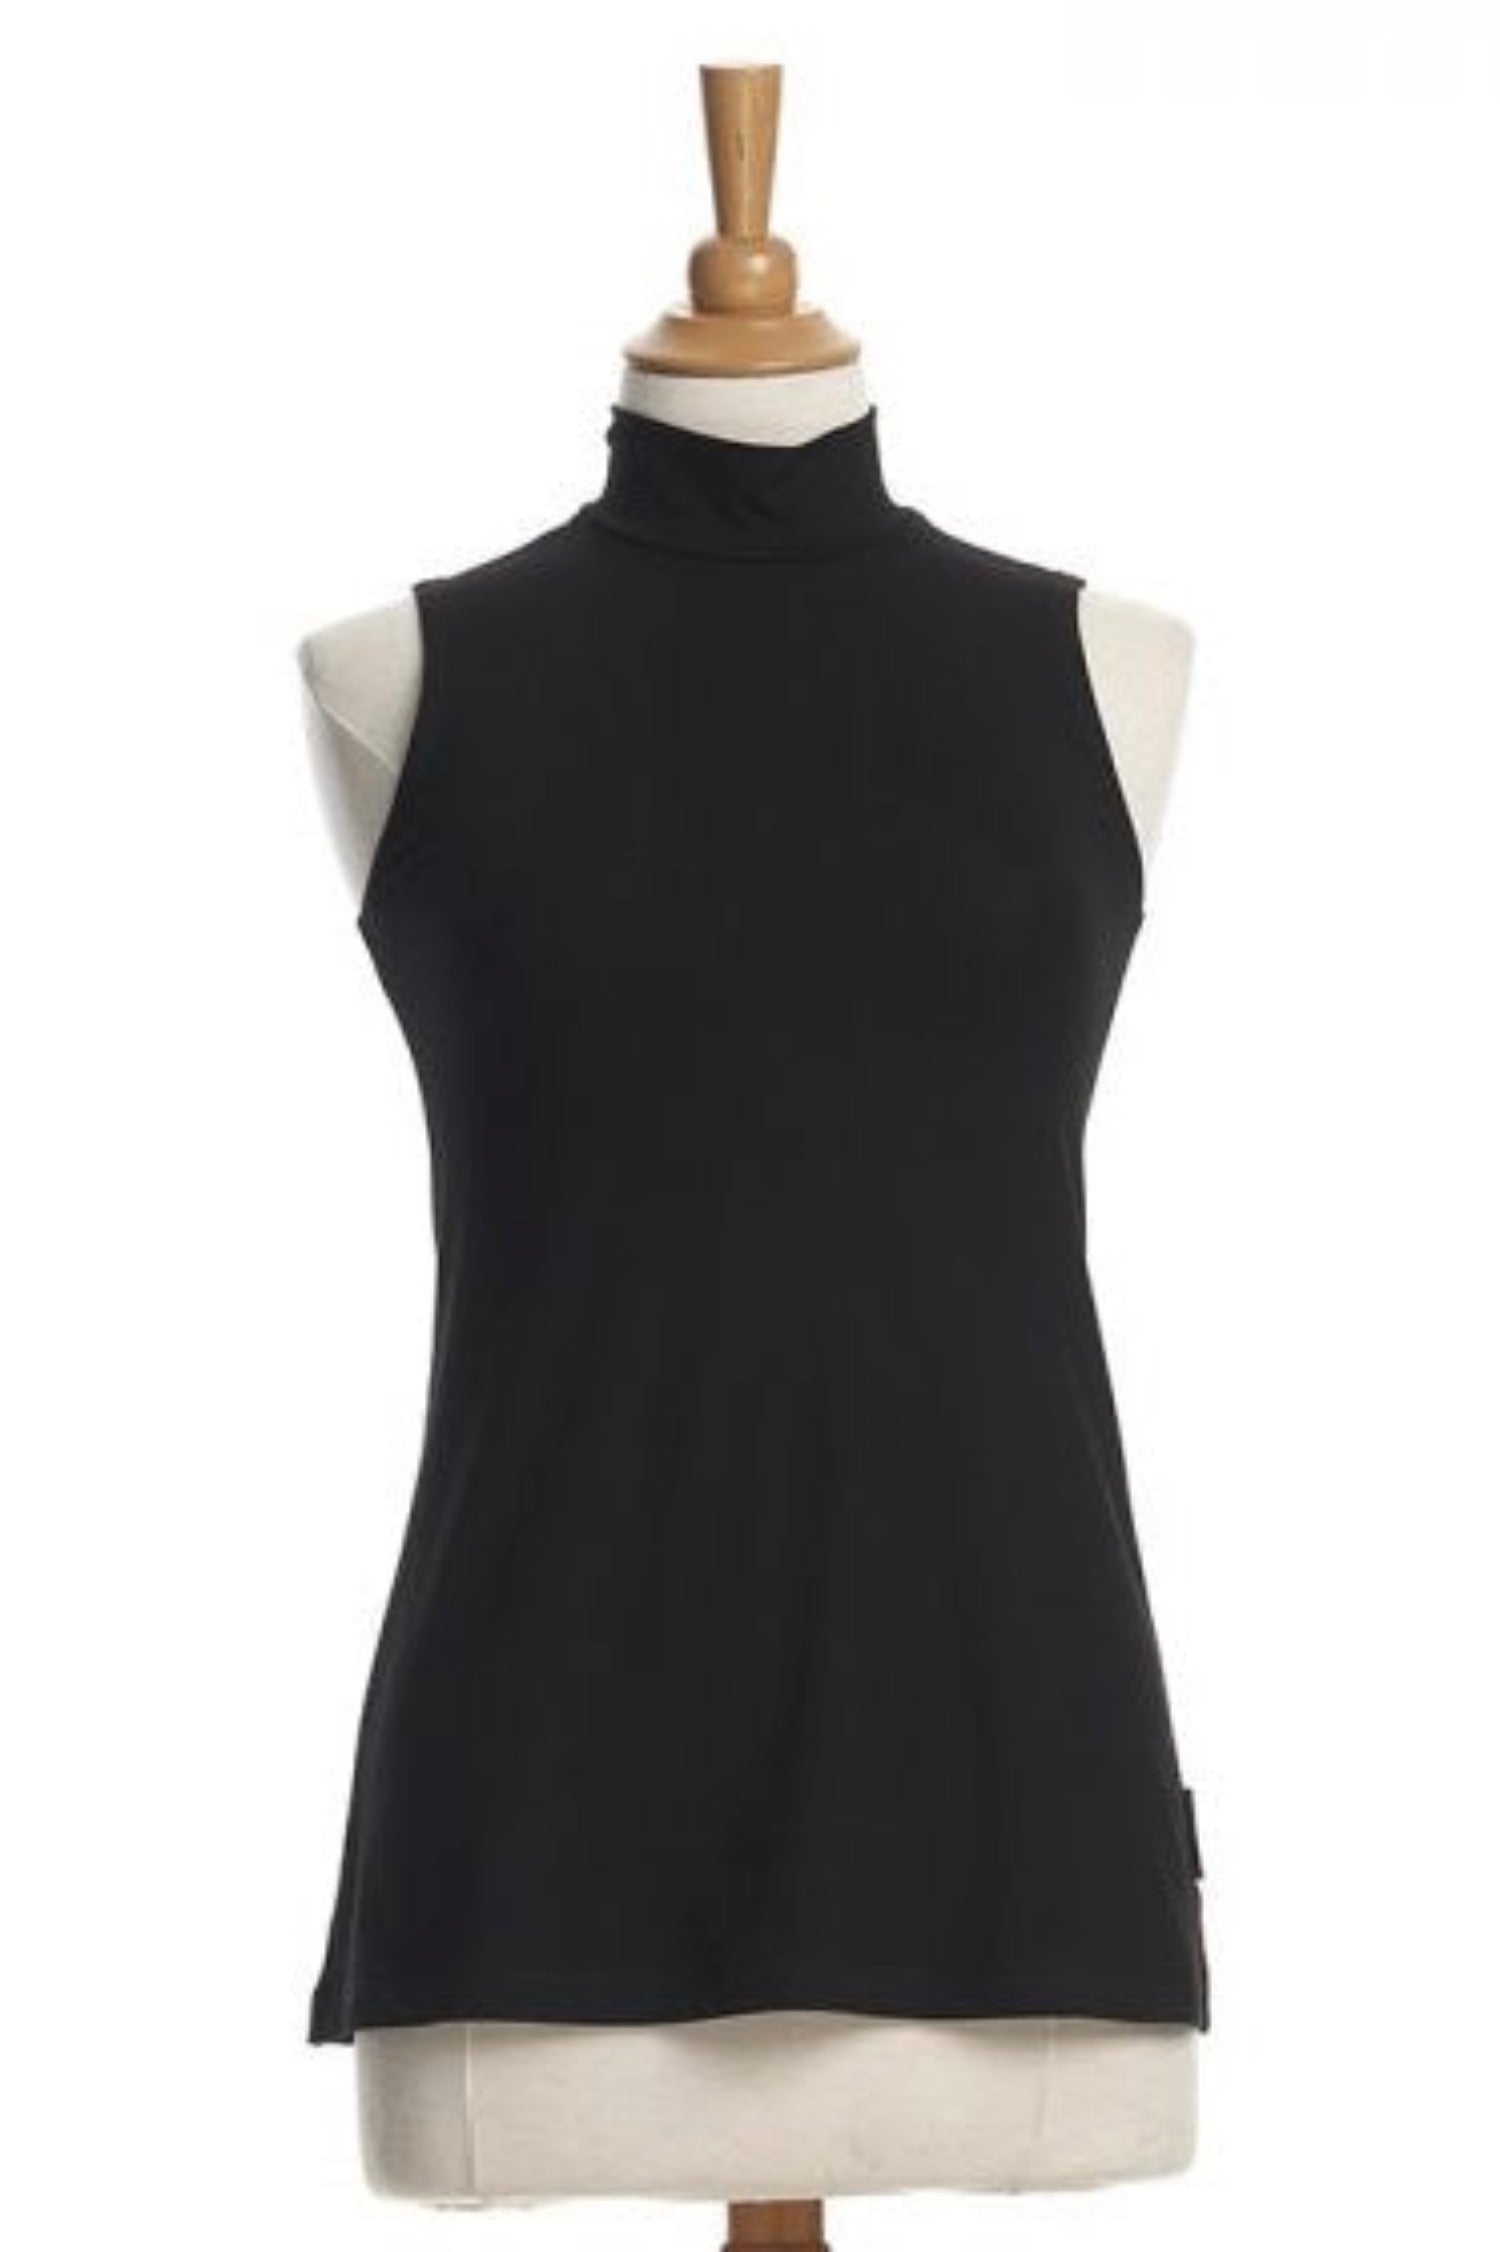 Saturne Top by Rien ne se Perd, Black, mock turtleneck, sleeveless, long, sizes XS to XXL, made in Quebec